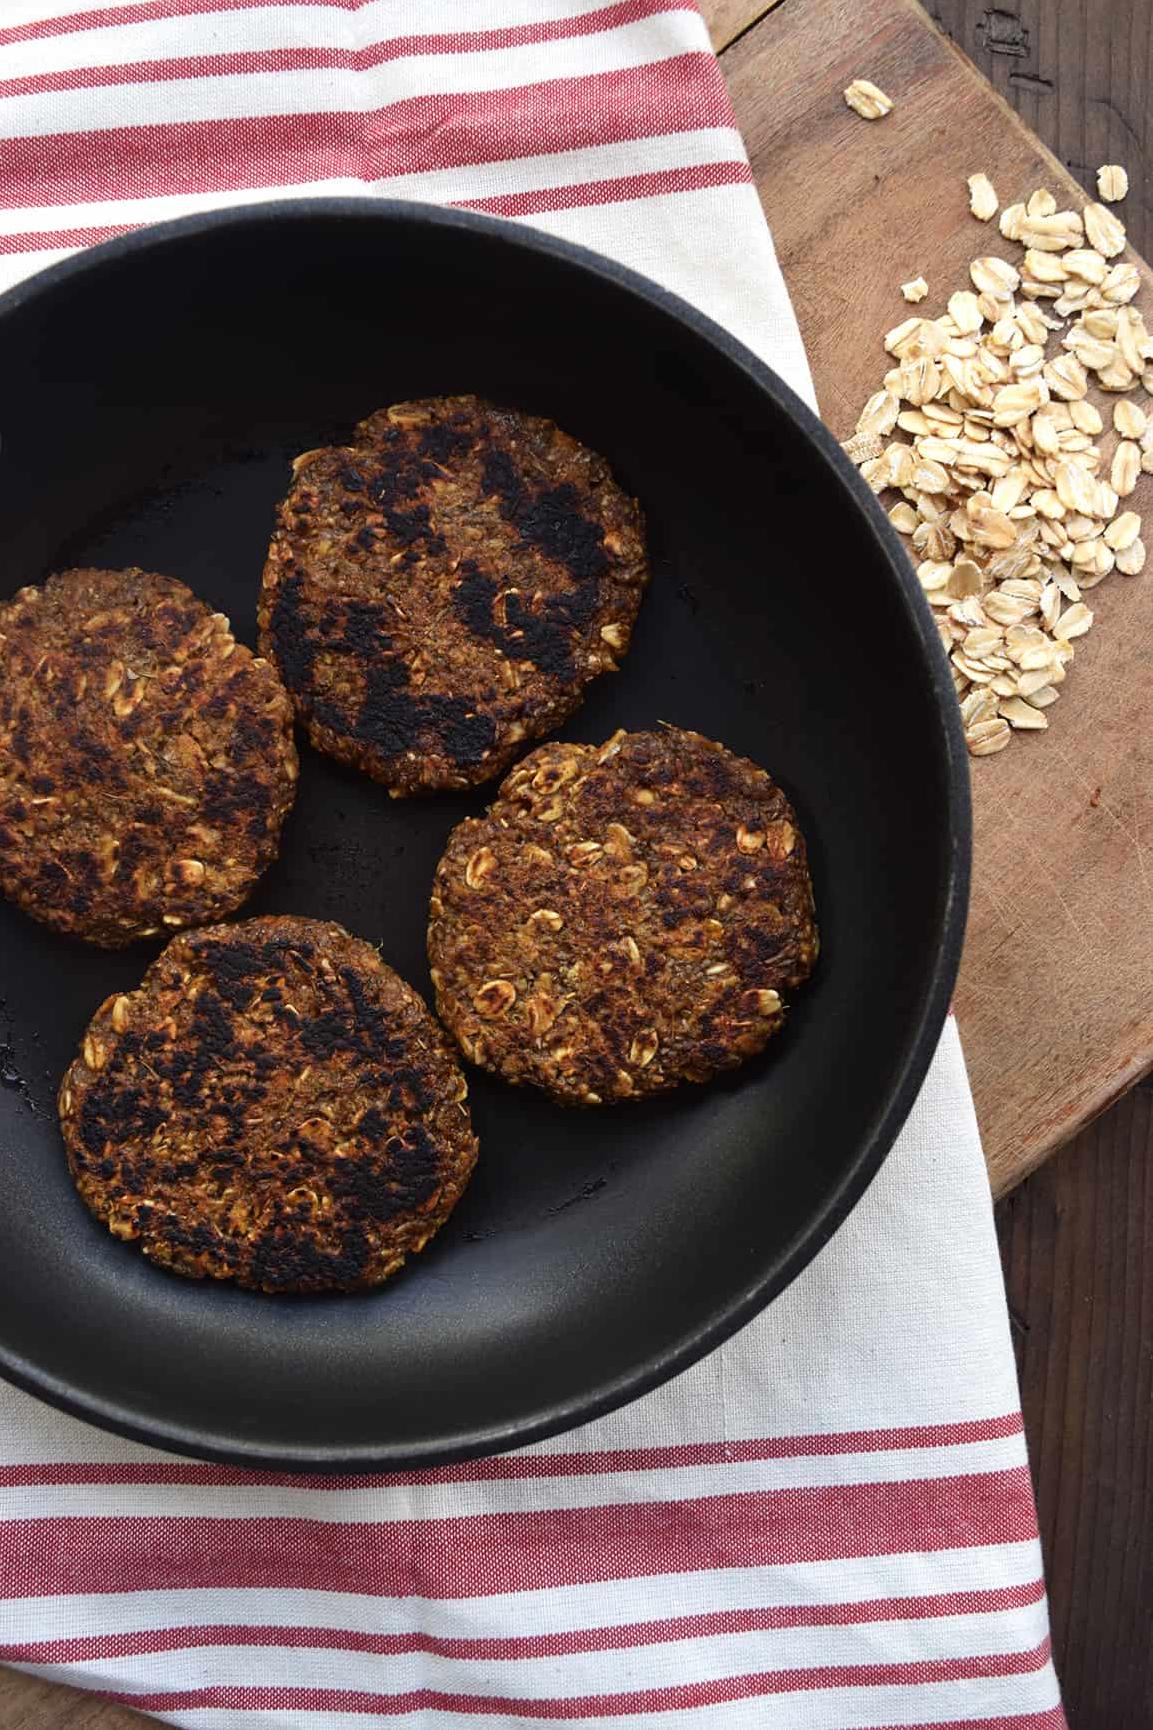  With just a few simple ingredients, you'll be able to whip up these incredible vegetarian sausage patties in no time.